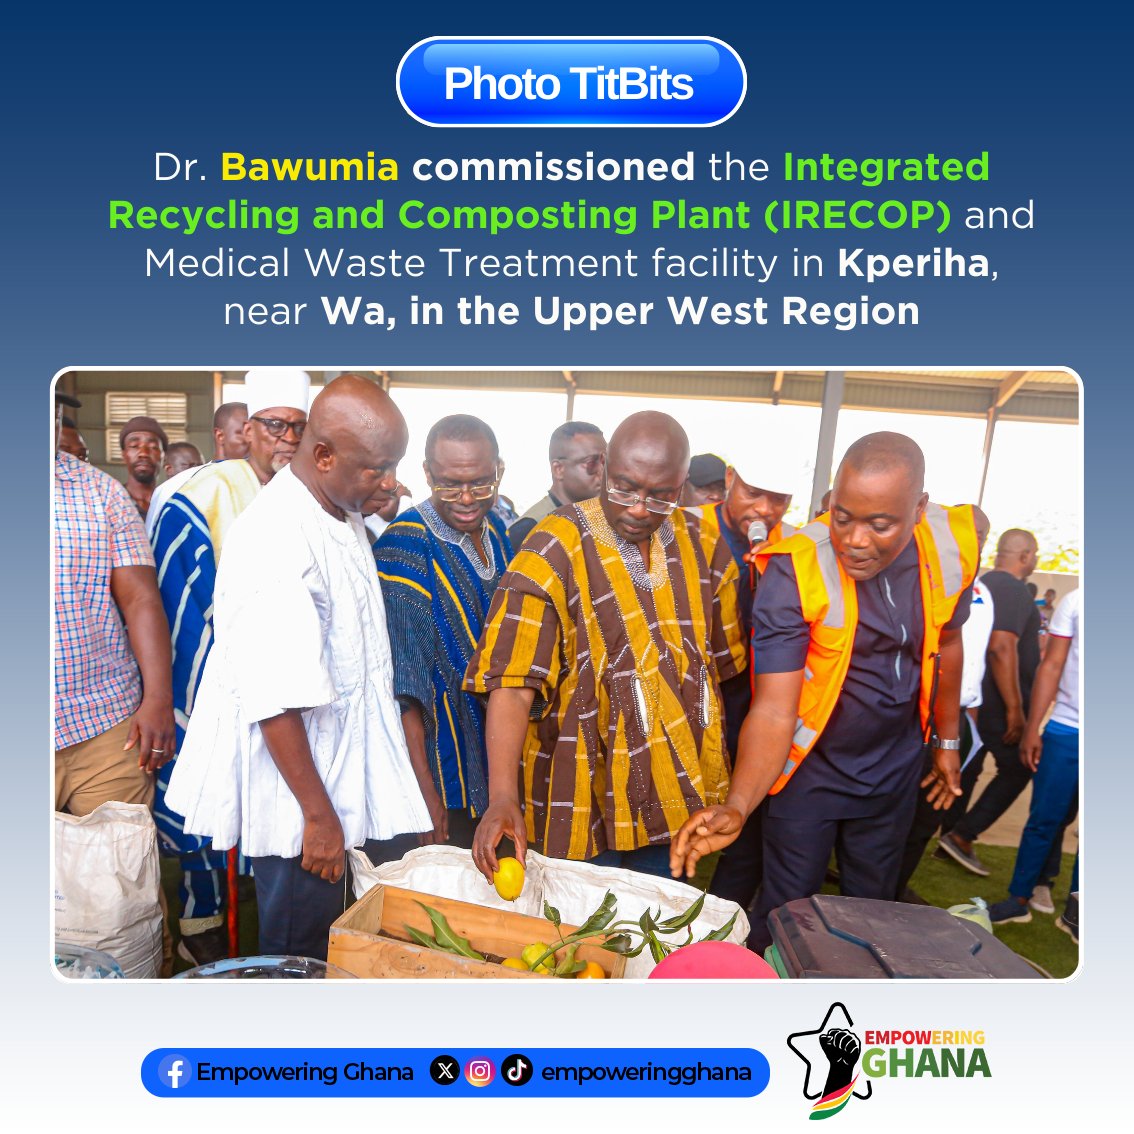 Dr. Bawumia Unveils Revolutionary Recycling and Medical Waste Facility in Upper West Region – A Game Changer for Kperiha

#EmpoweringGhana #Ghana #Bawumia2024 #NationBuilding #NPP #FutureLeadership #Bawumia #BreakingThe8WithBawumia #GhanaNewsAgency 

YOLO | 1 Don | Bongo |